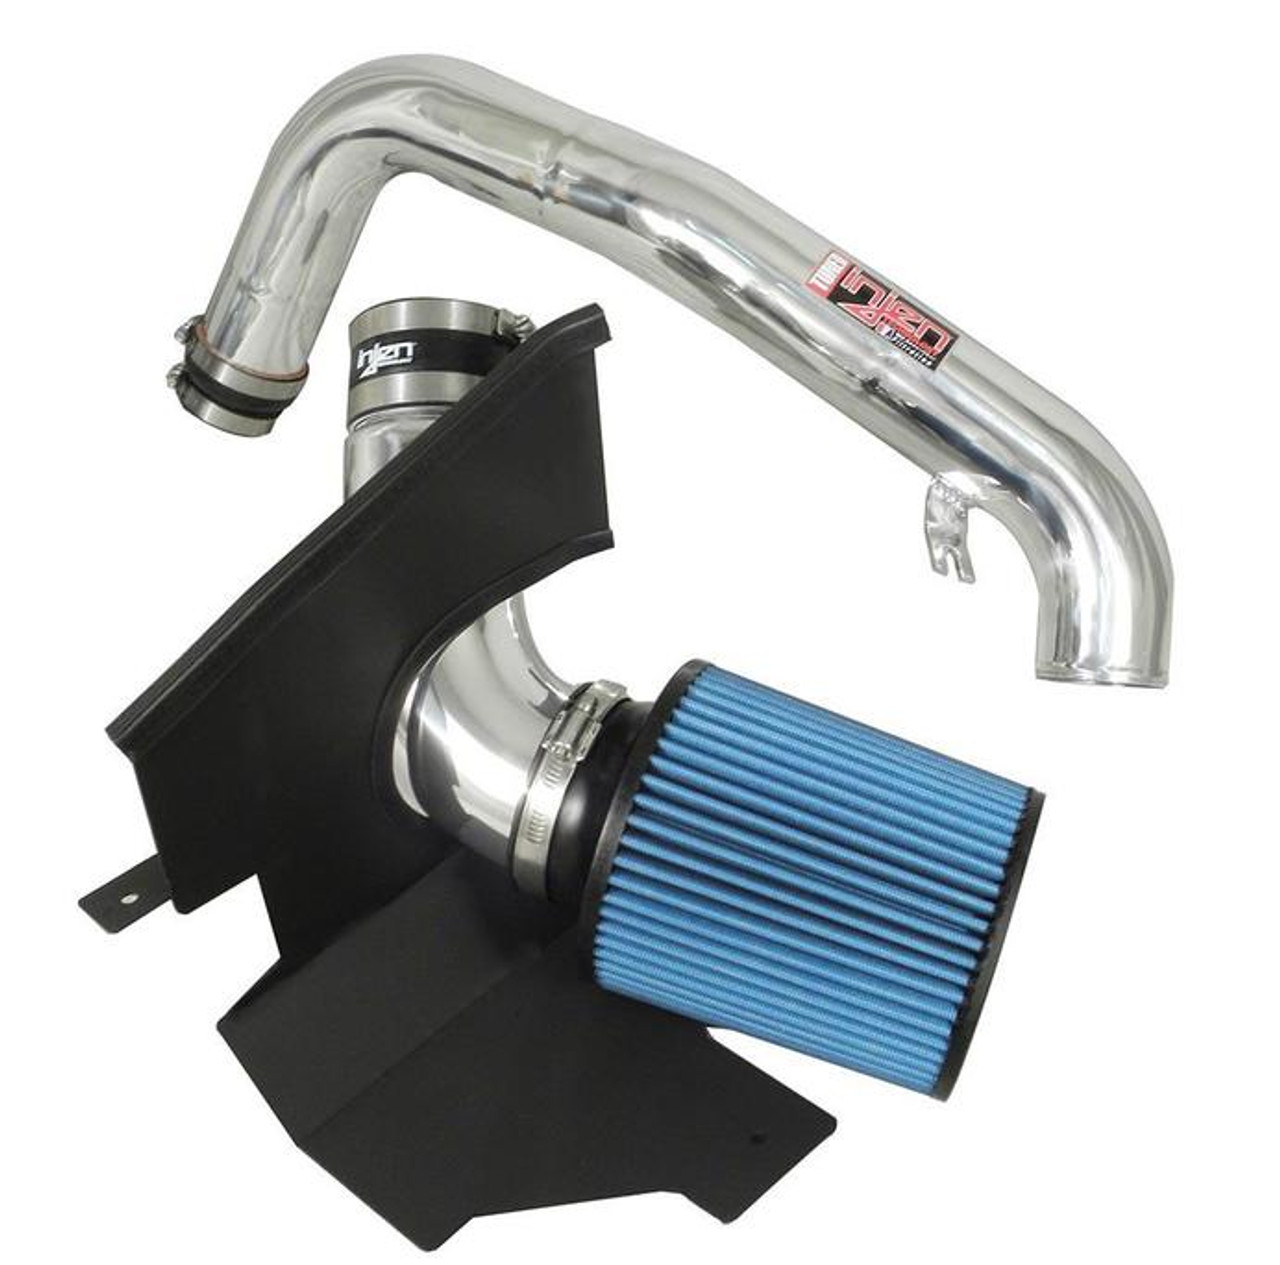 FORD SHORT RAM AIR INTAKE SYSTEM
Color: Polished.  Intake Color: Polished.  Filter Color: Blue